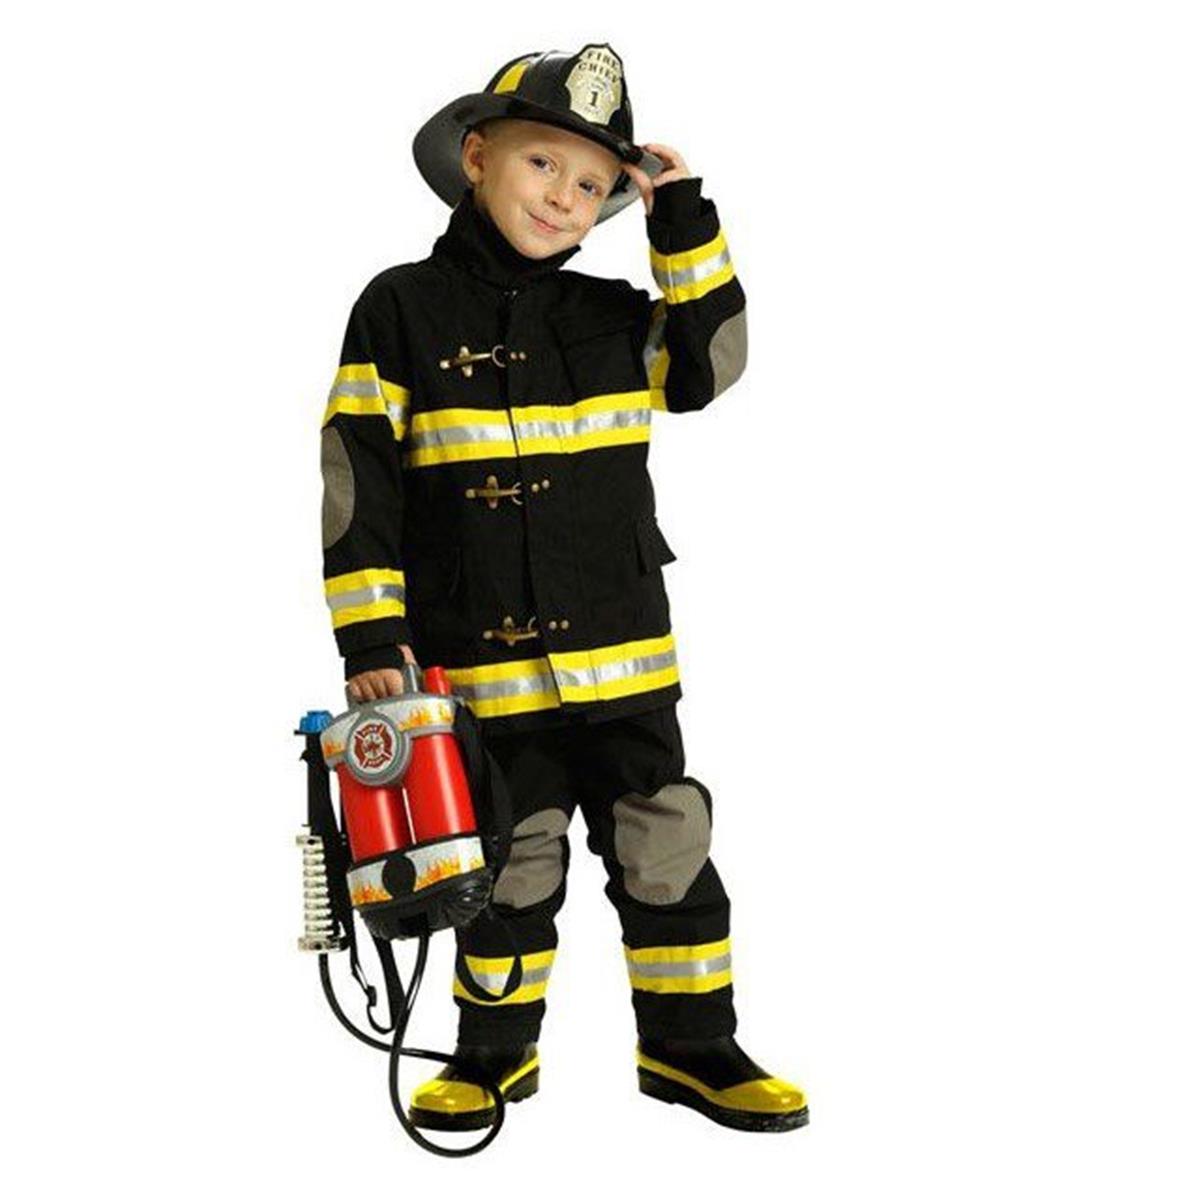 271552 Firefighter Black Deluxe Child Costume - Extra Small